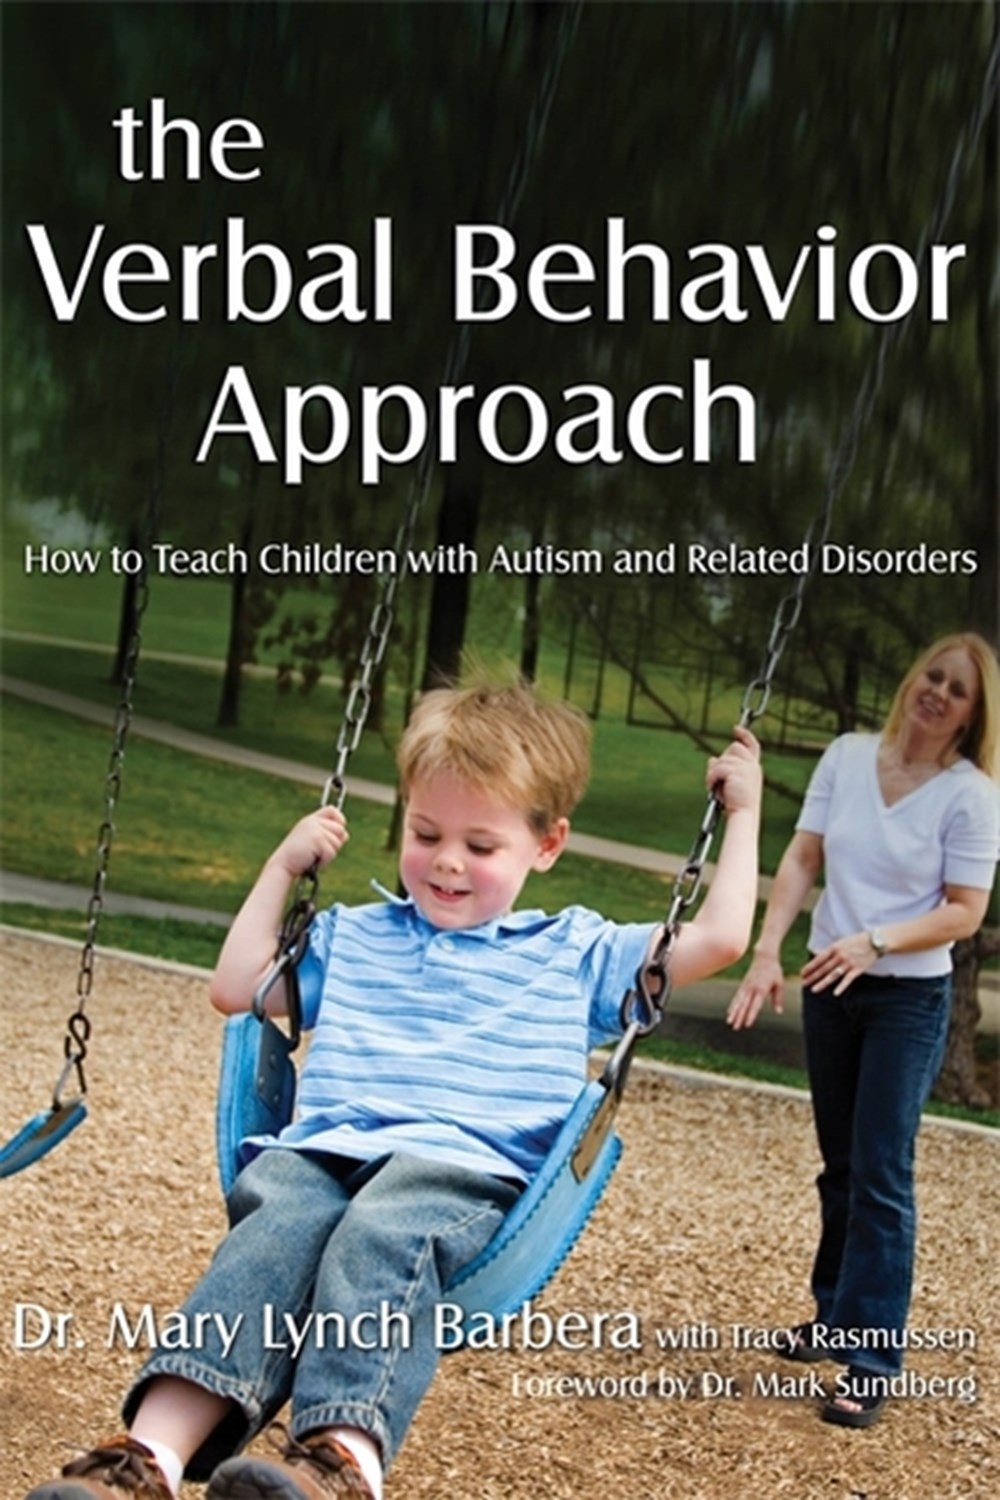 Verbal Behavior Approach: How to Teach Children with Autism and Related Disorders